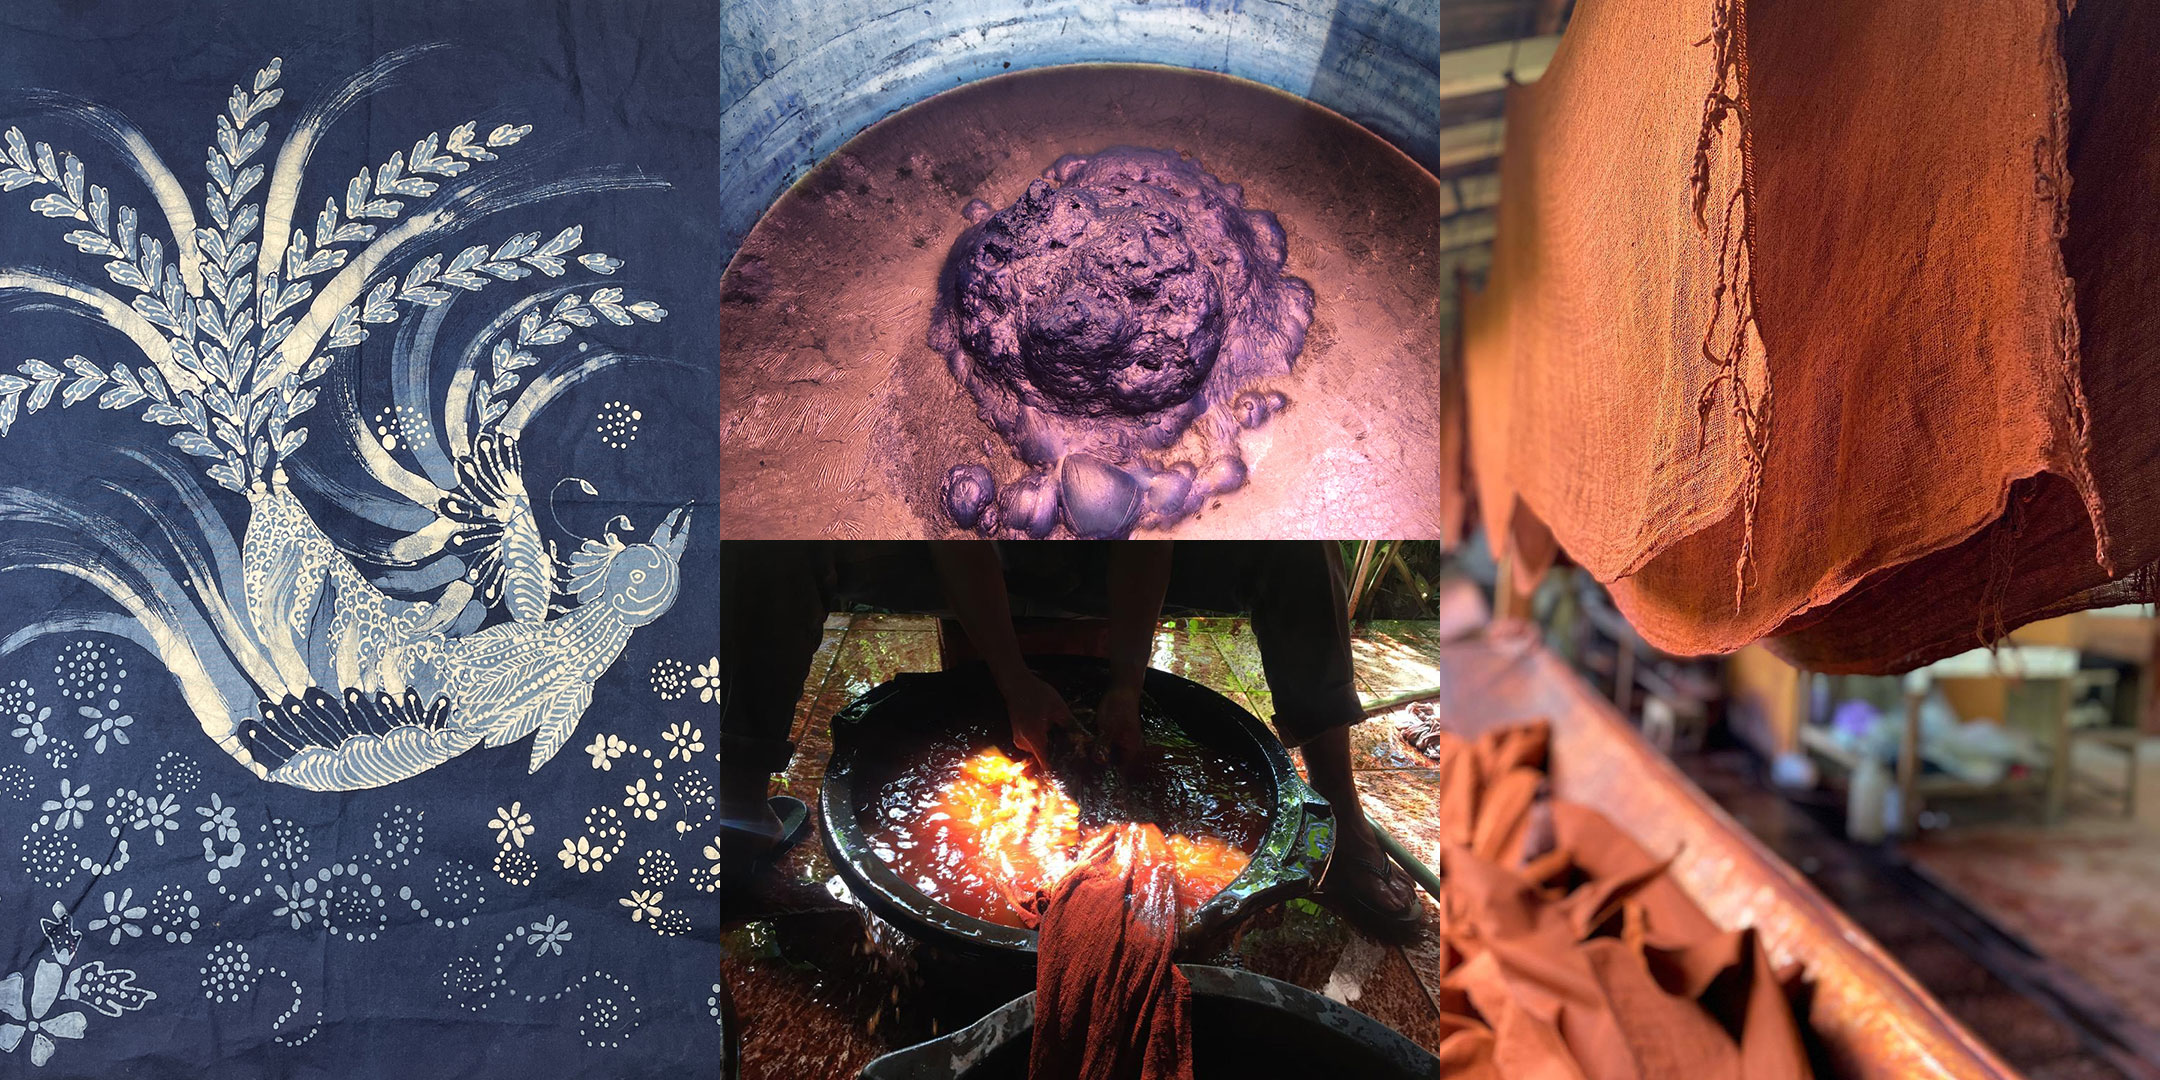 Indigo and Ceriops Natural Dyes with Agus Ismoyo and Nia Fliam